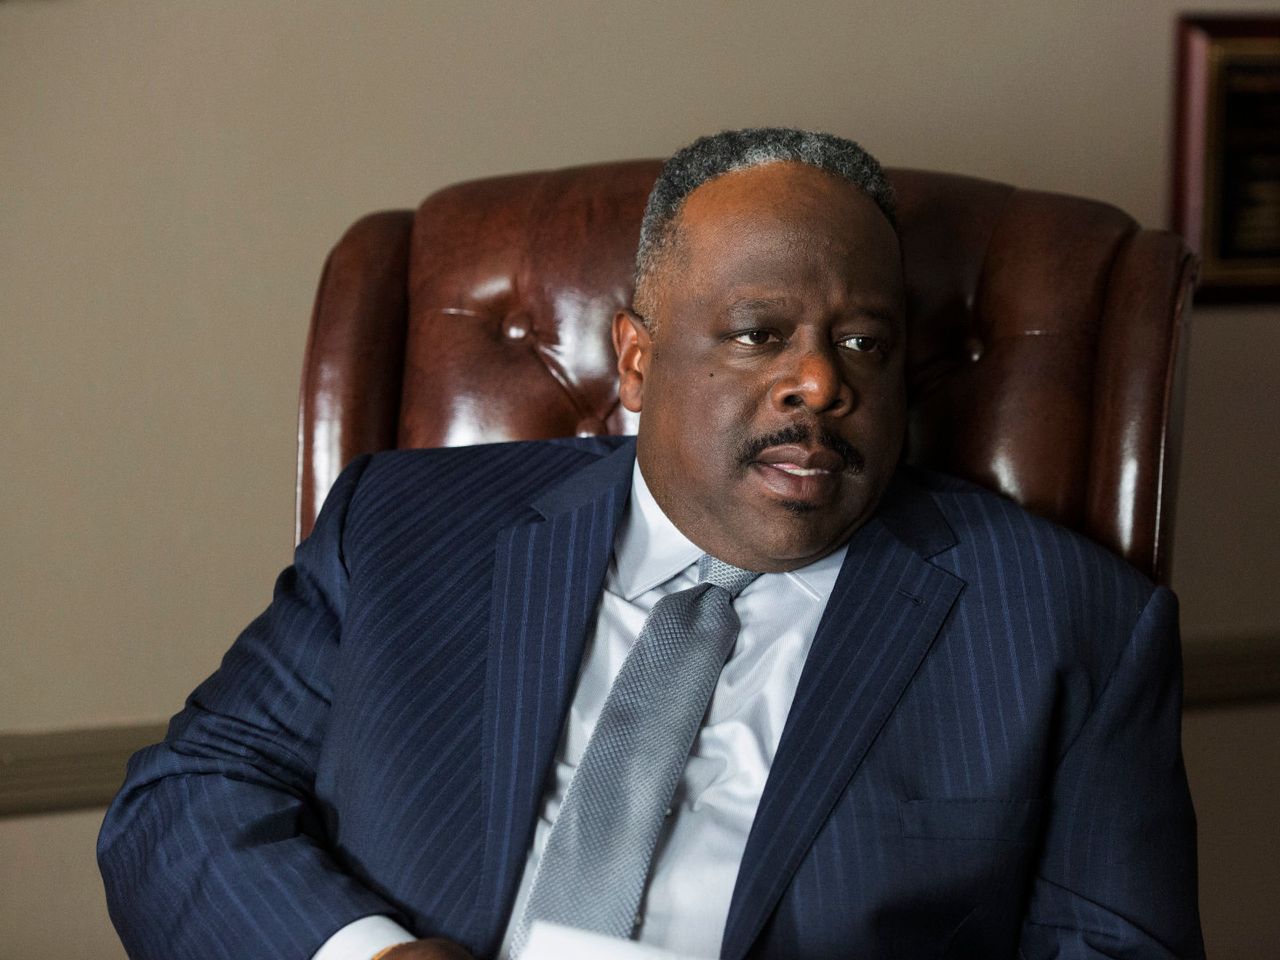 Cedric the Entertainer -- or Cedric Kyles, rather -- in "First Reformed."